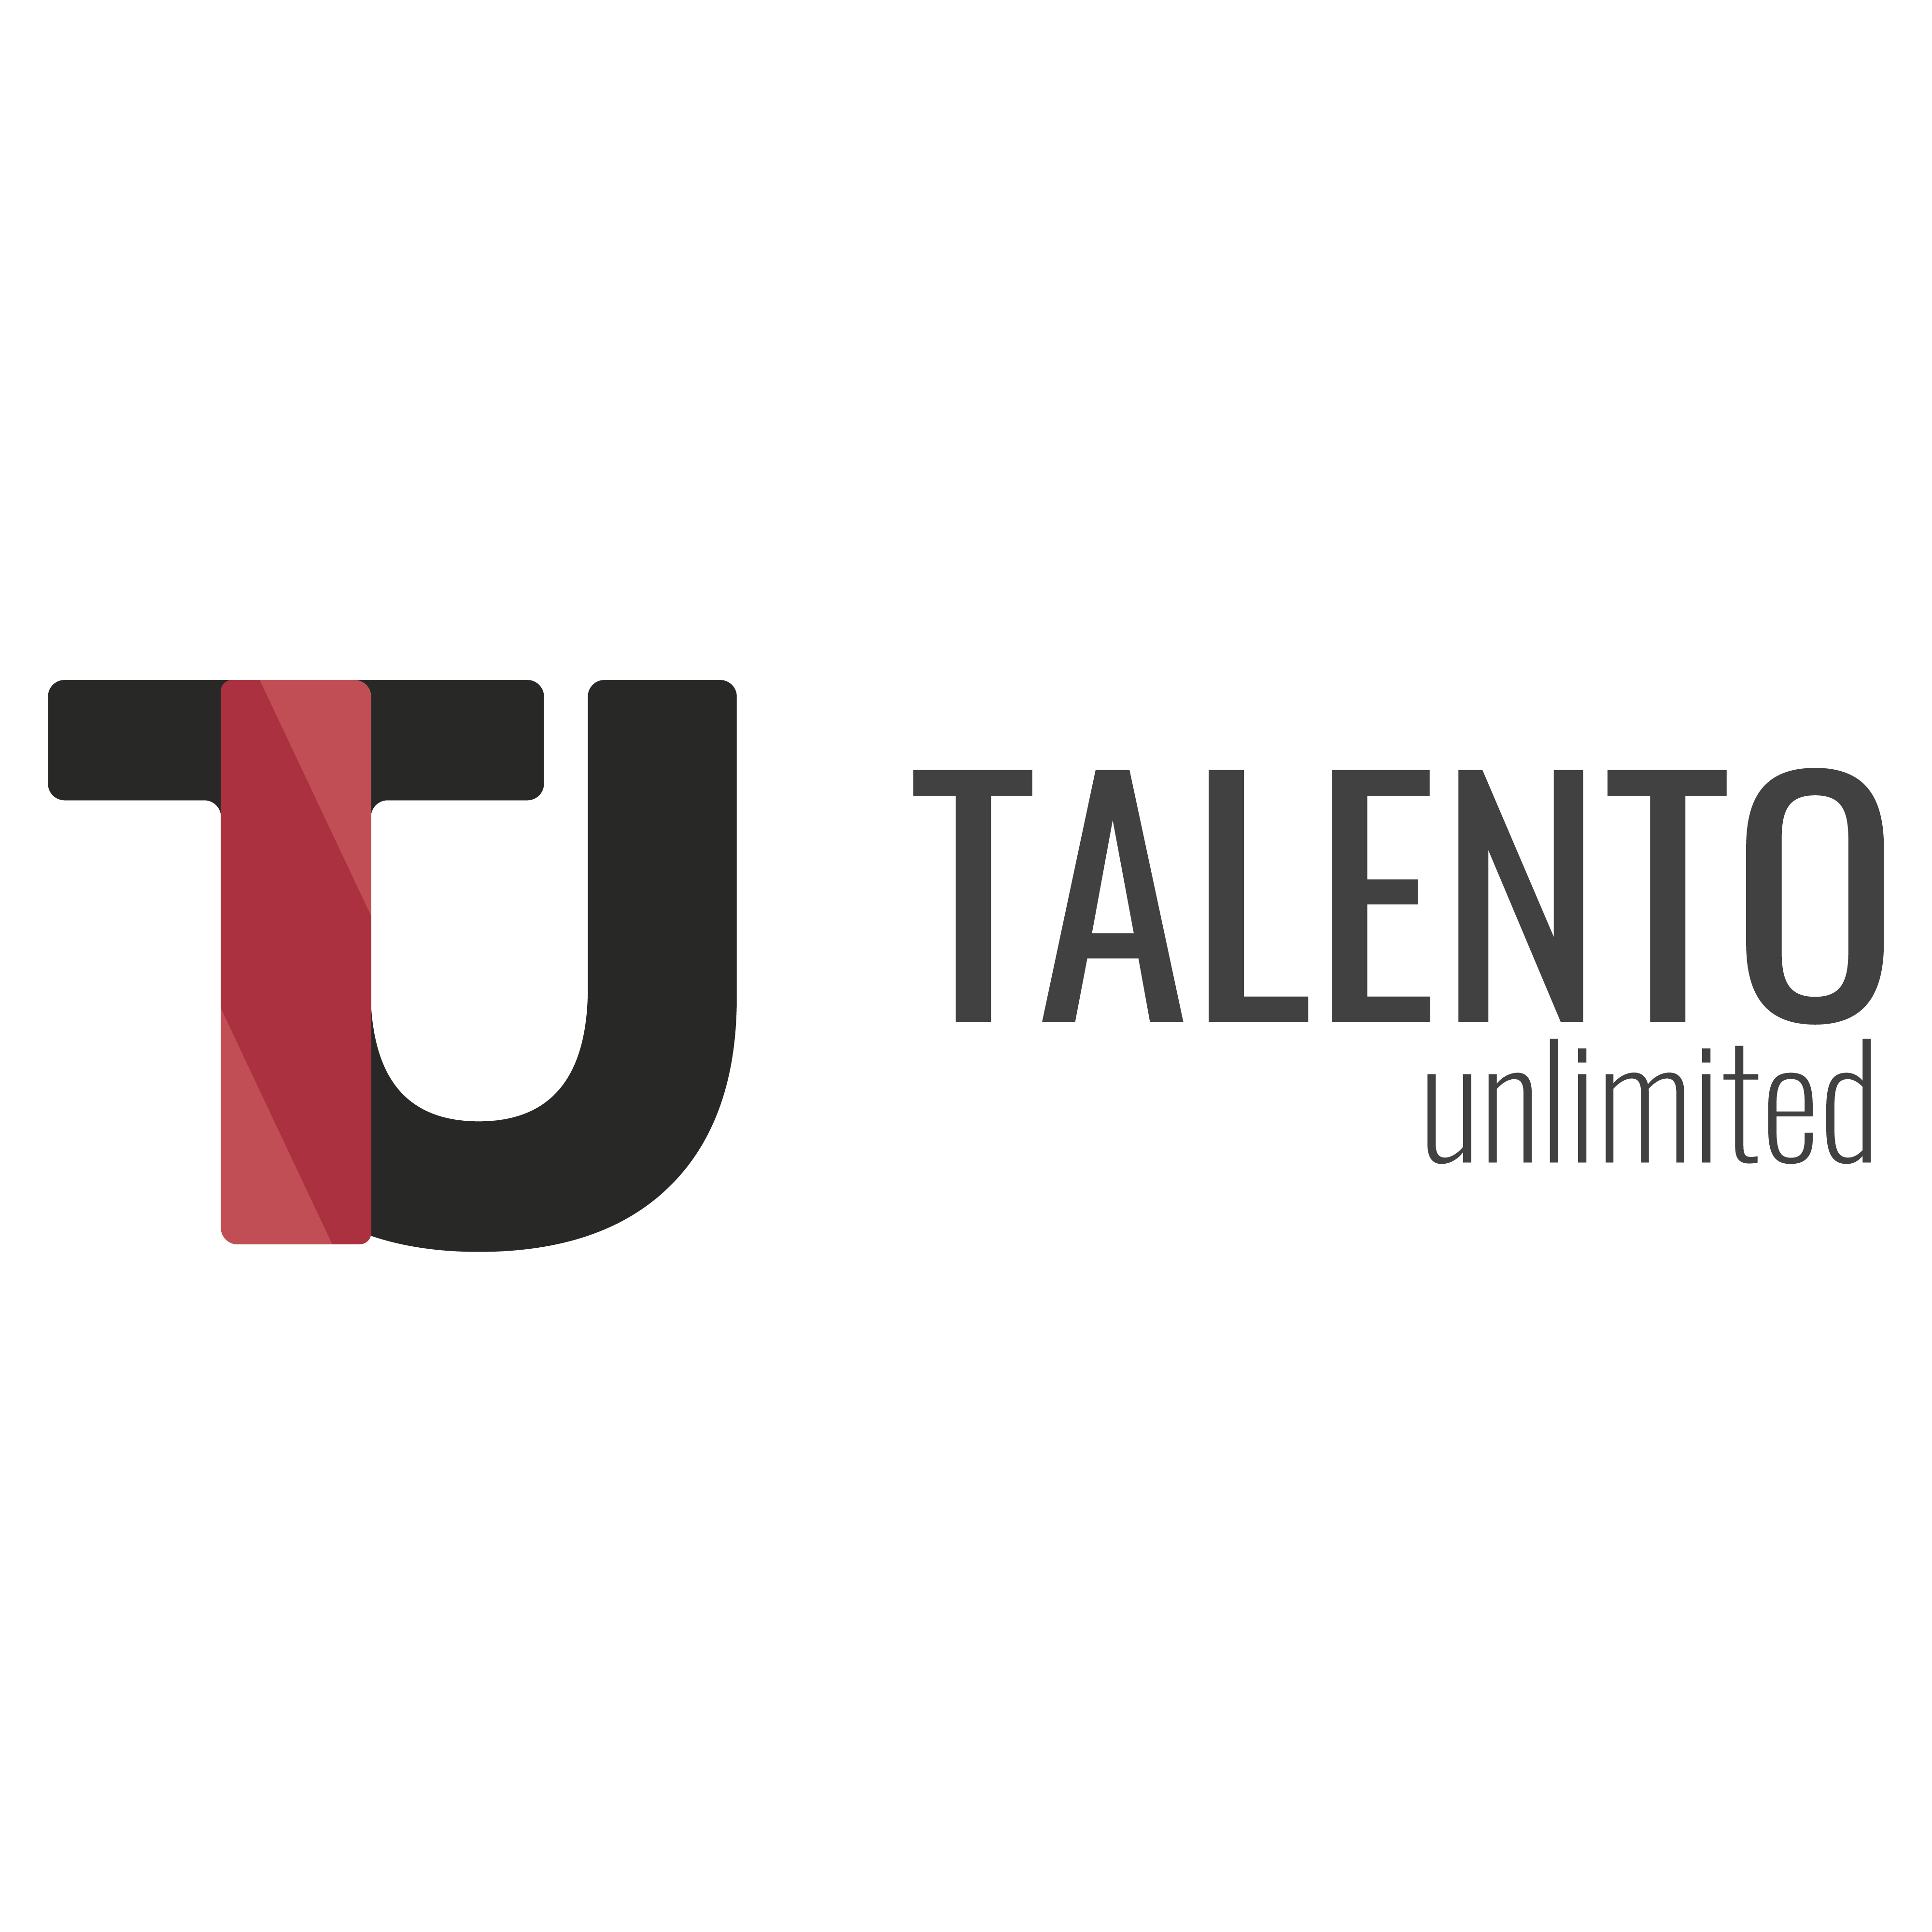 Talento Unlimited CMYK Logos_Talento - Long Colored (1).png